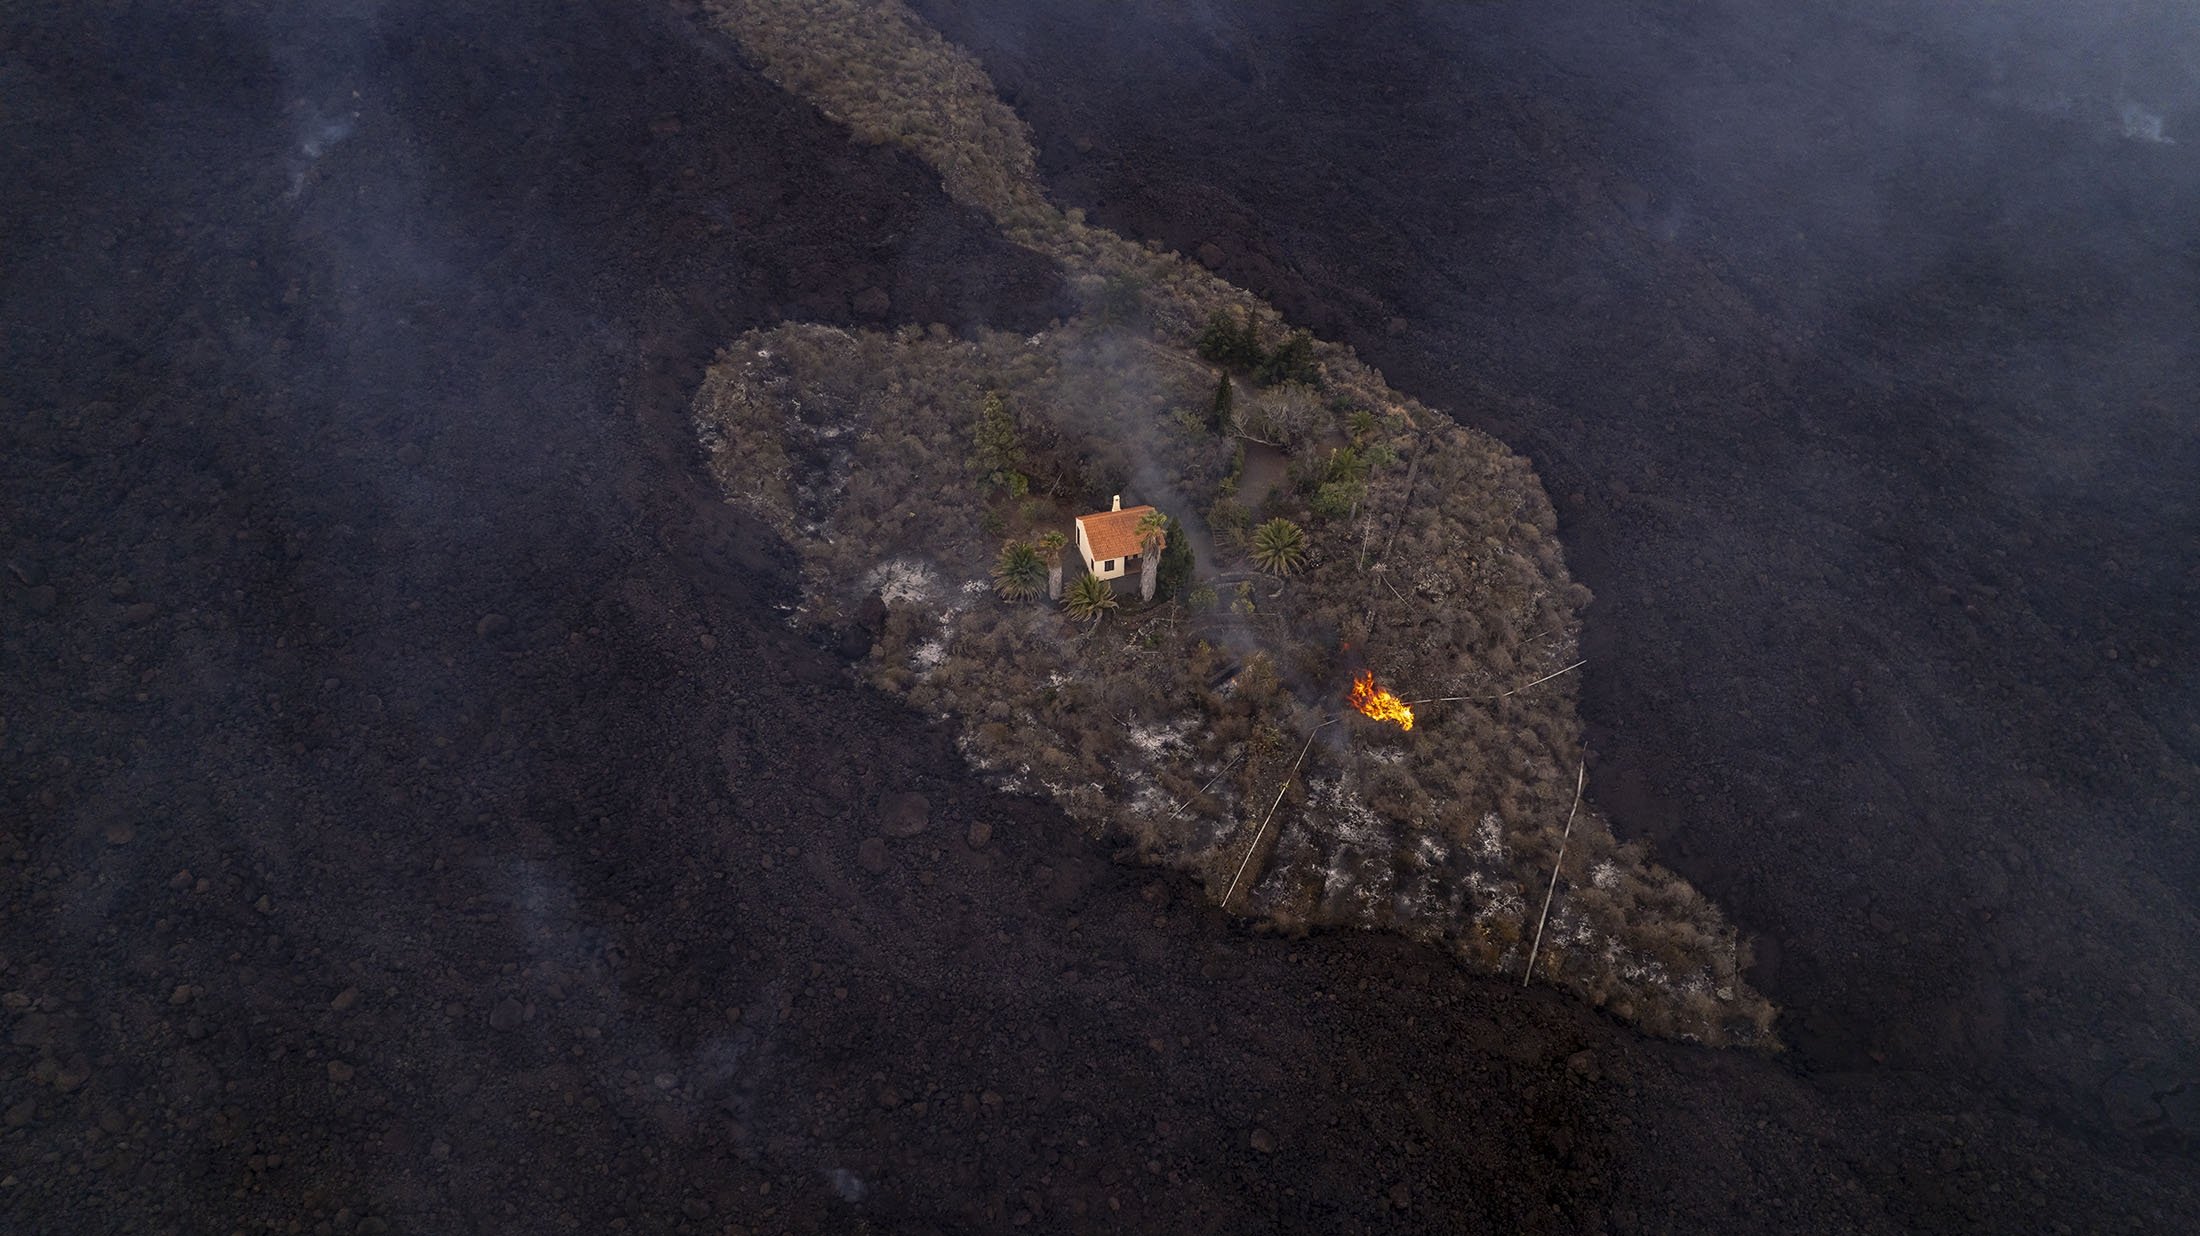 A house remains intact as lava flows after a volcano erupted near Las Manchas on the island of La Palma in the Canaries, Spain, Sept. 20, 2021. (iLoveTheWorld via AP)